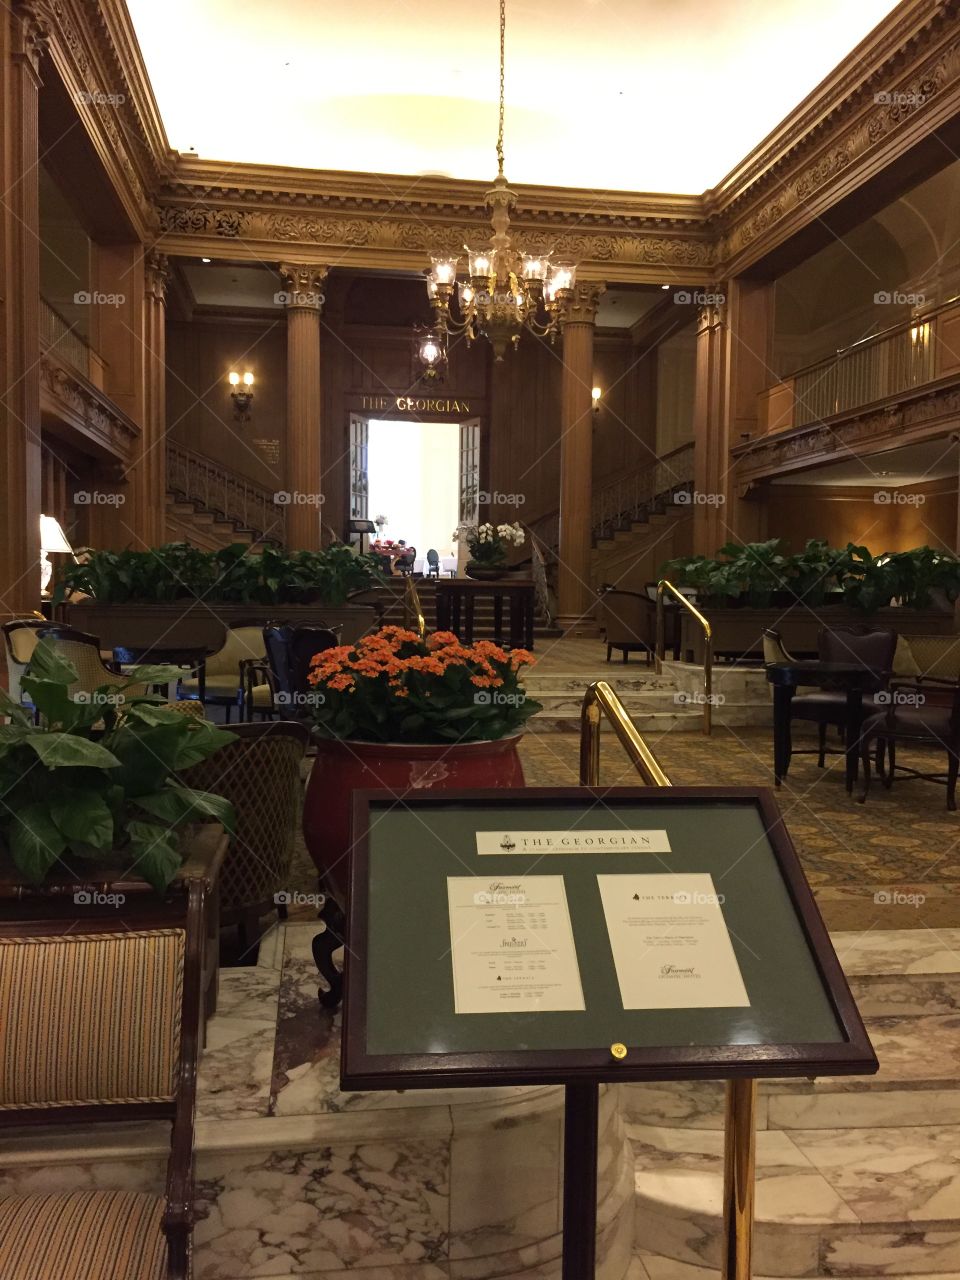 Fairmont hotel, hotel lobby, traditional hotel, chairs seating area, fancy, elegant, famous